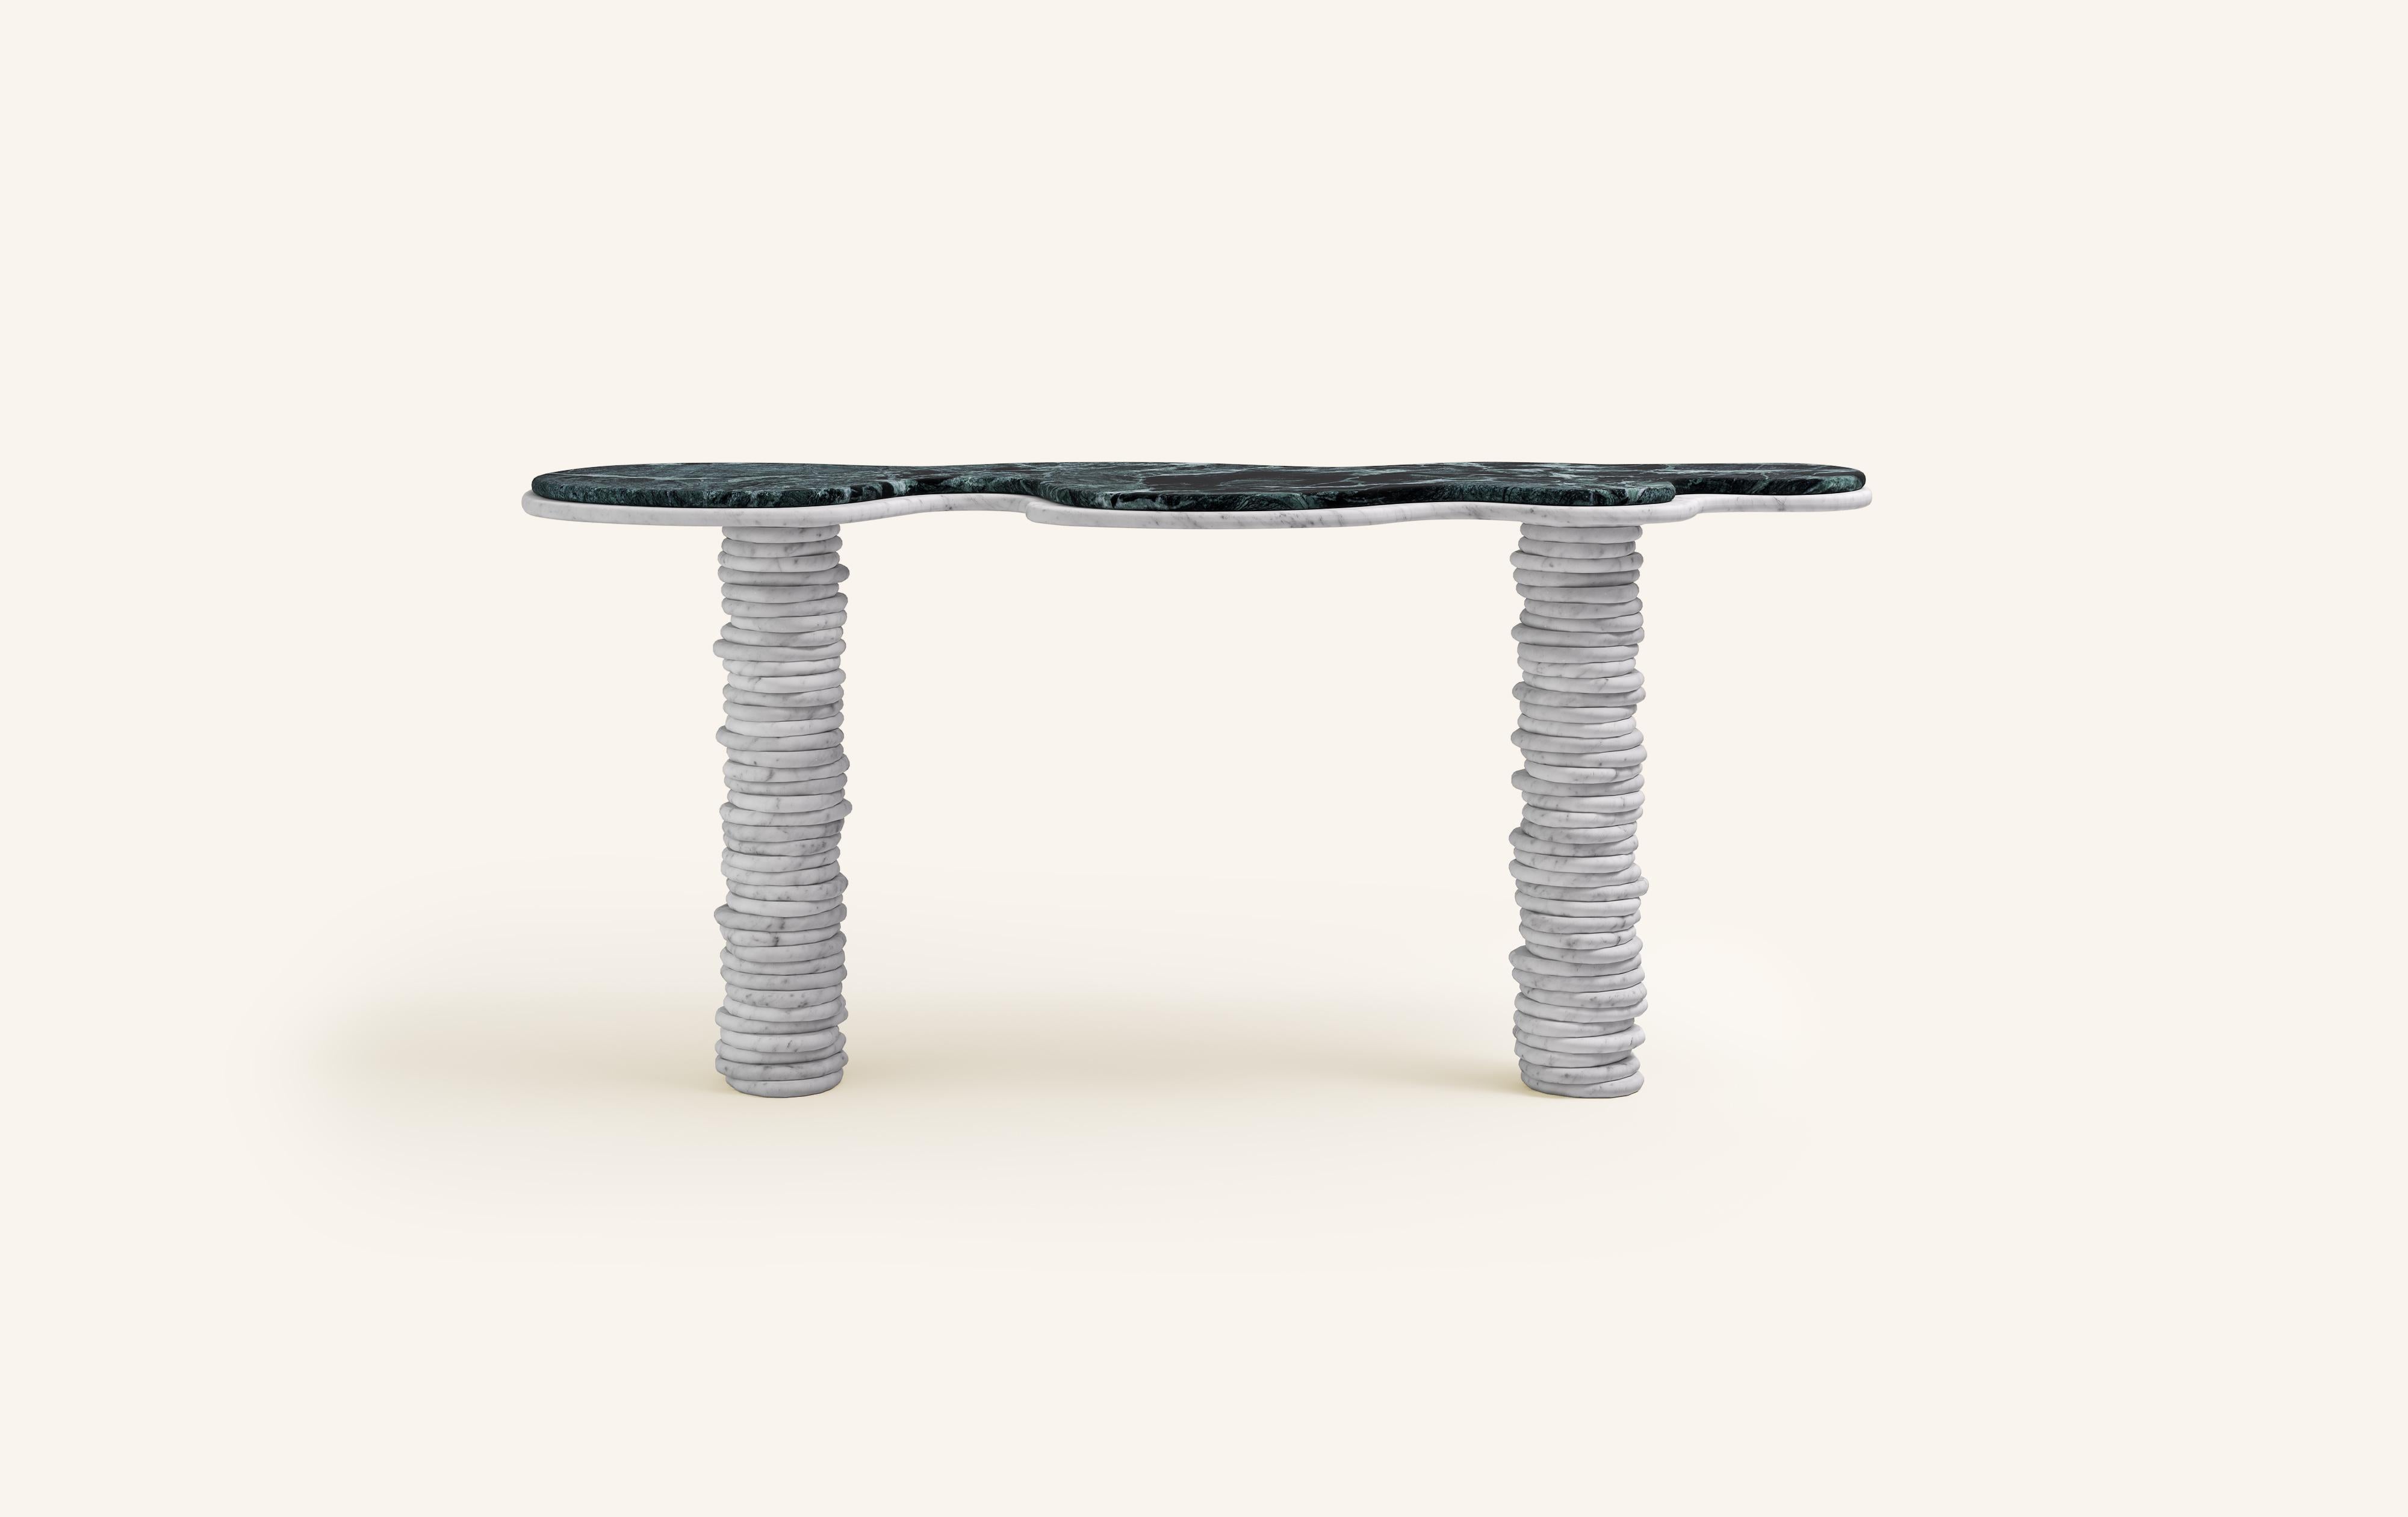 'ONDA', ITALIAN FOR 'WAVE', HAS INSPIRED A FREEFORM ORGANIC BODY, HEROING A COMPLEX AND TEXTURED COLLECTION. COMPRISING SIDE TABLES FOR LAYERING, COFFEE TABLES AND DINING TABLES.

DIMENSIONS:
60”L x 18”W x 29-3/4”H: 
- 1.5